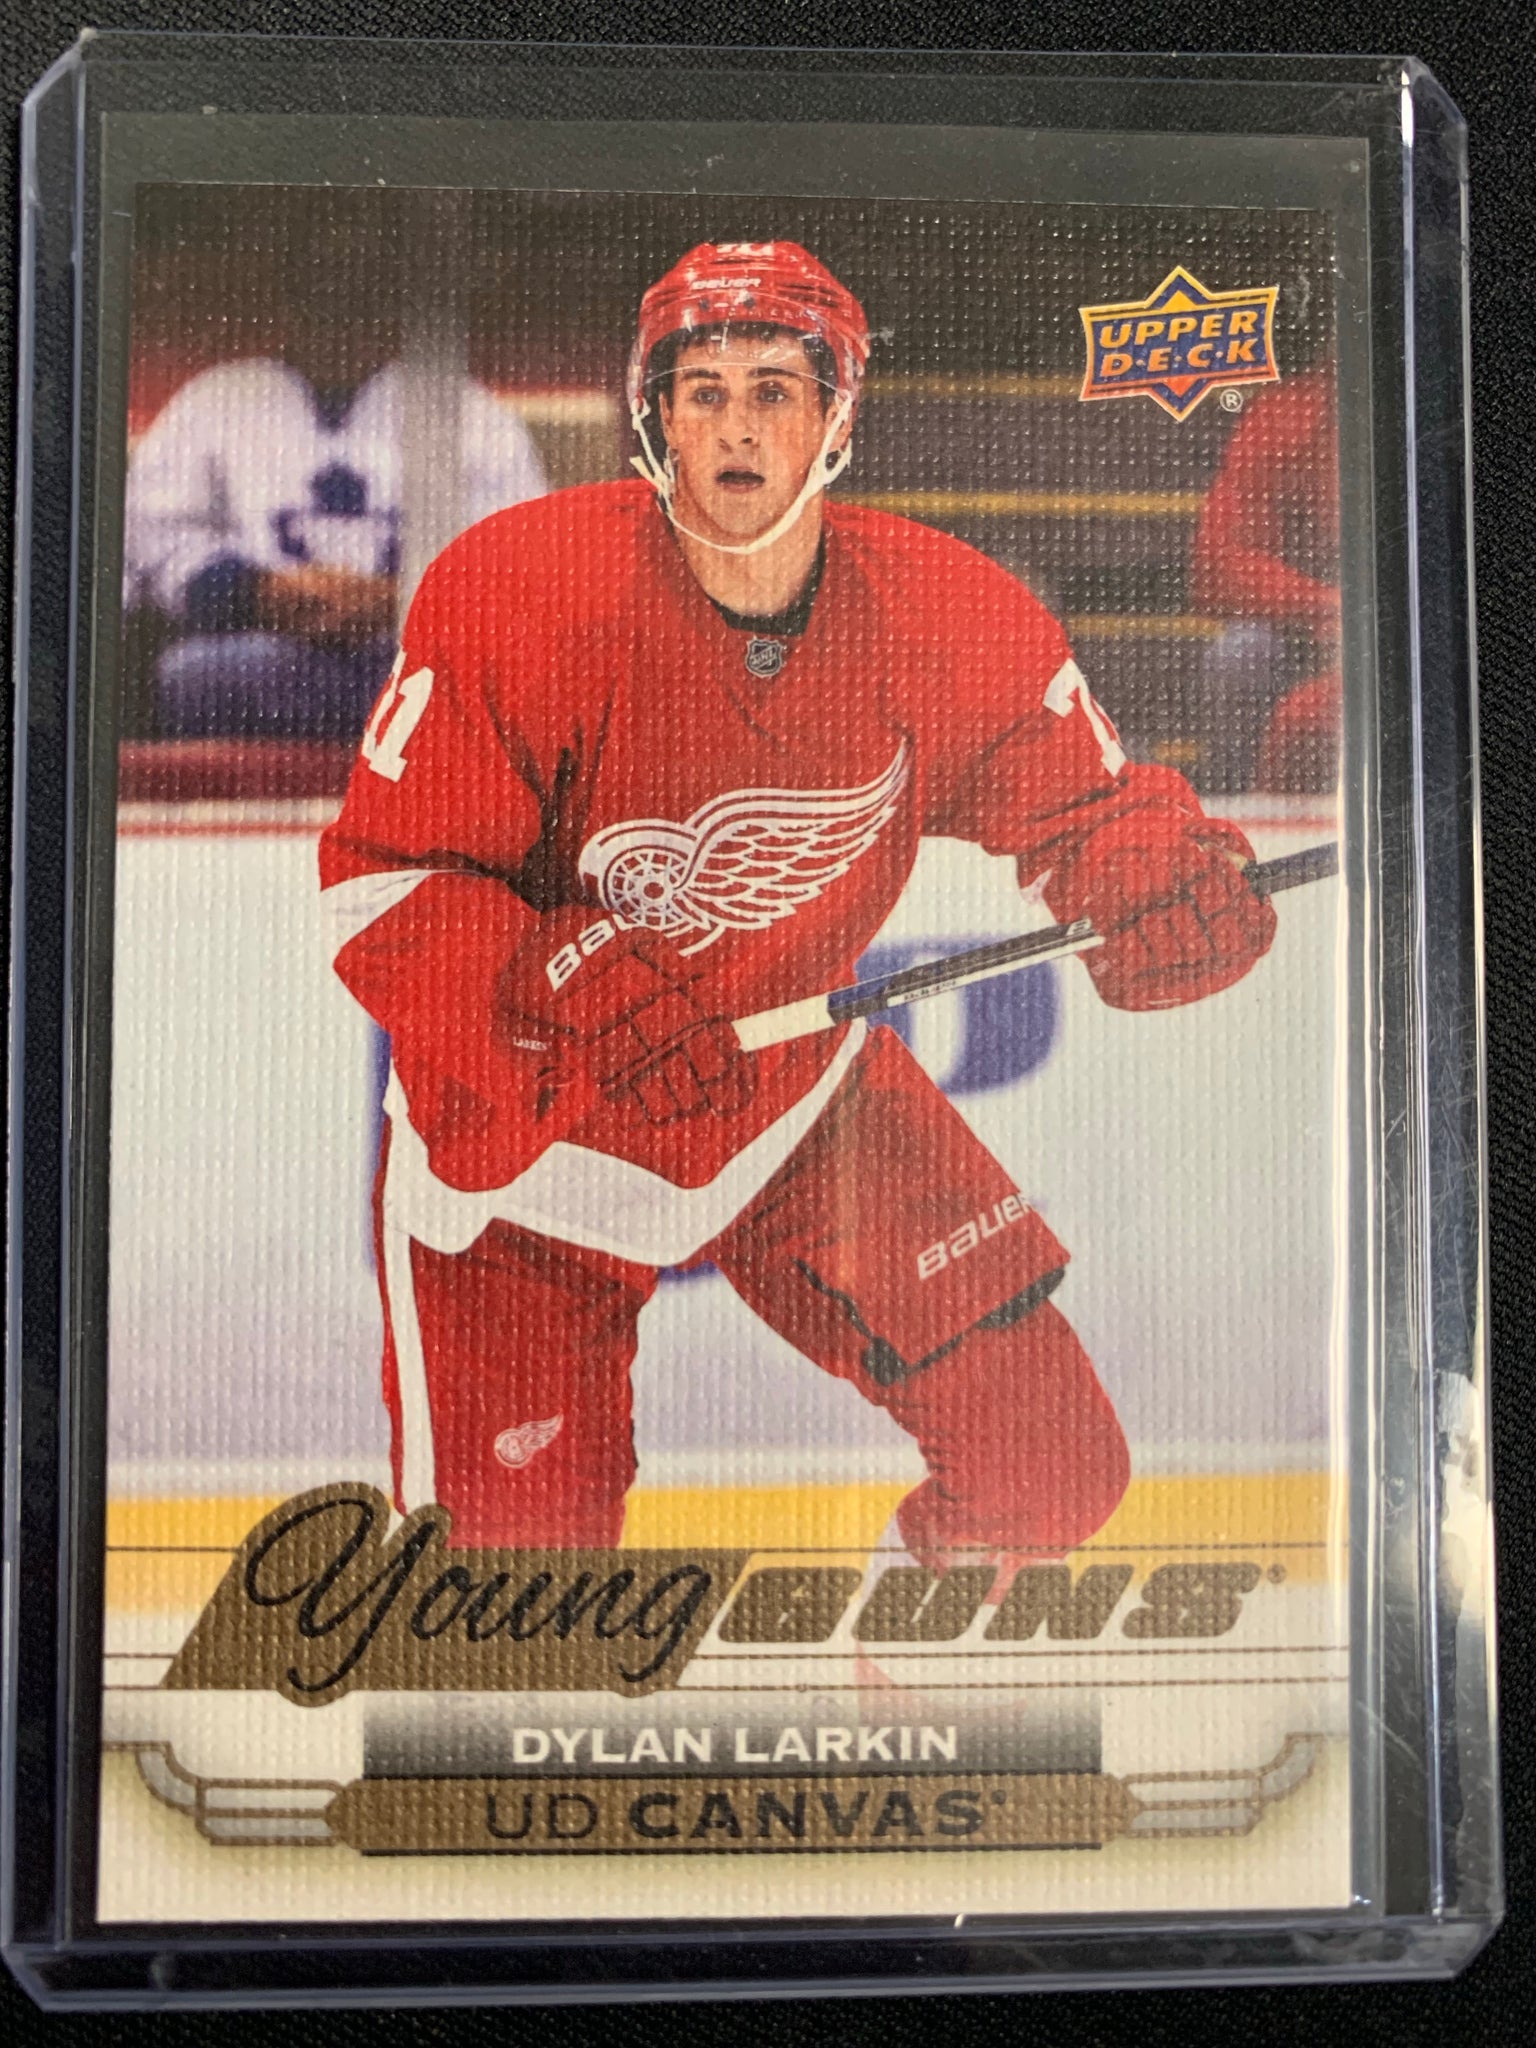 2015-16 UPPER DECK HOCKEY #C112 DETROIT RED WINGS - DYLAN LARKIN YOUNG GUNS CANVAS ROOKIE CARD